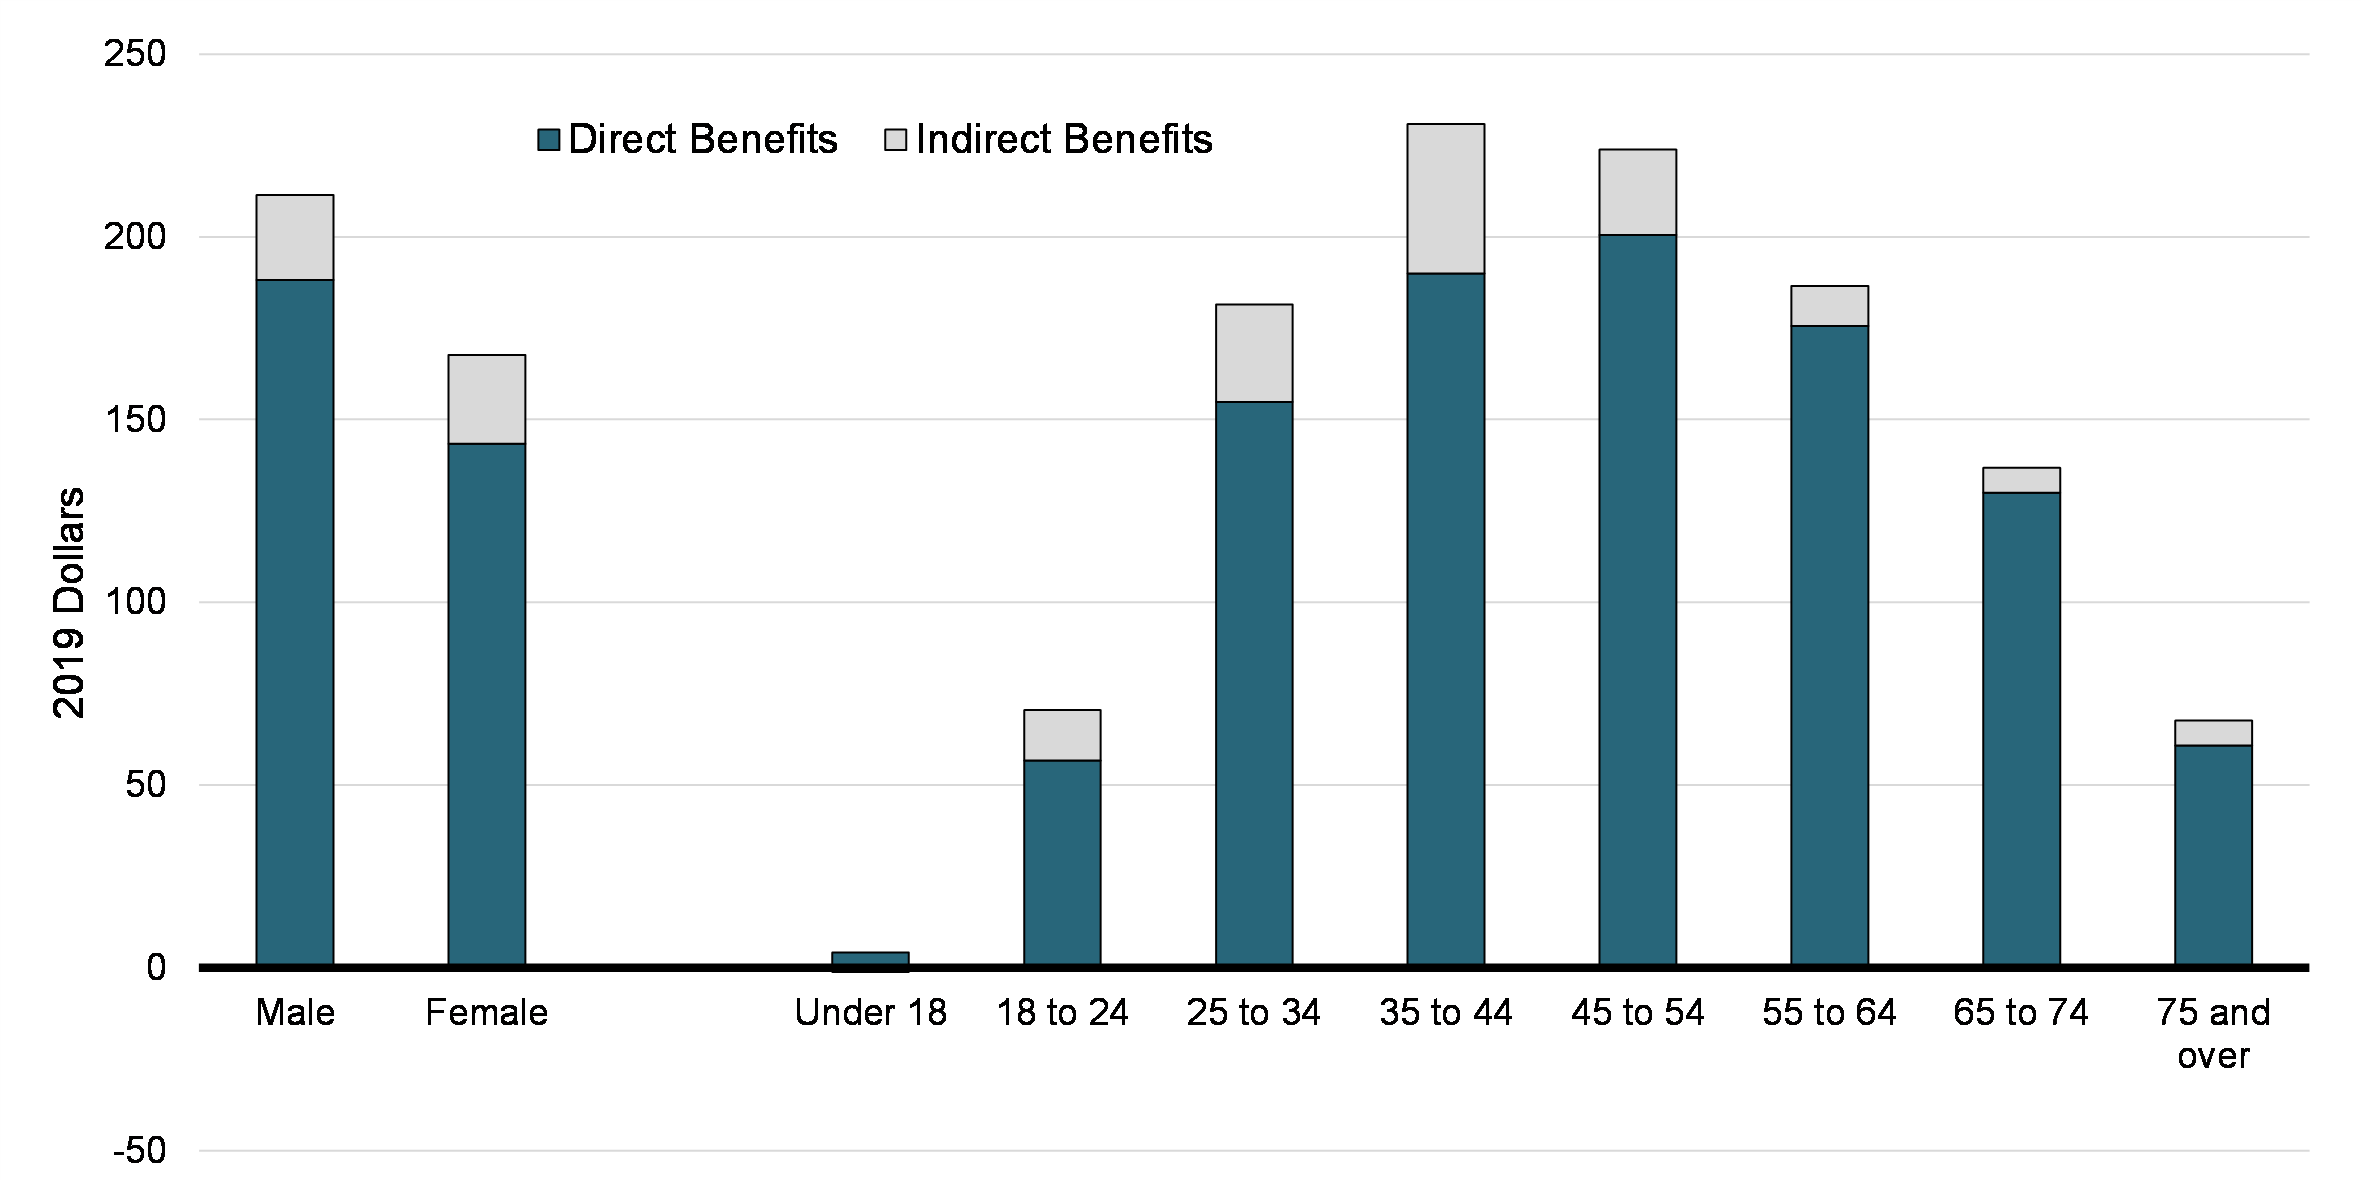  Chart 19: Direct and Indirect Benefits of UPD Deduction, by Gender and Age Group (2018), 
in 2019 Dollars
